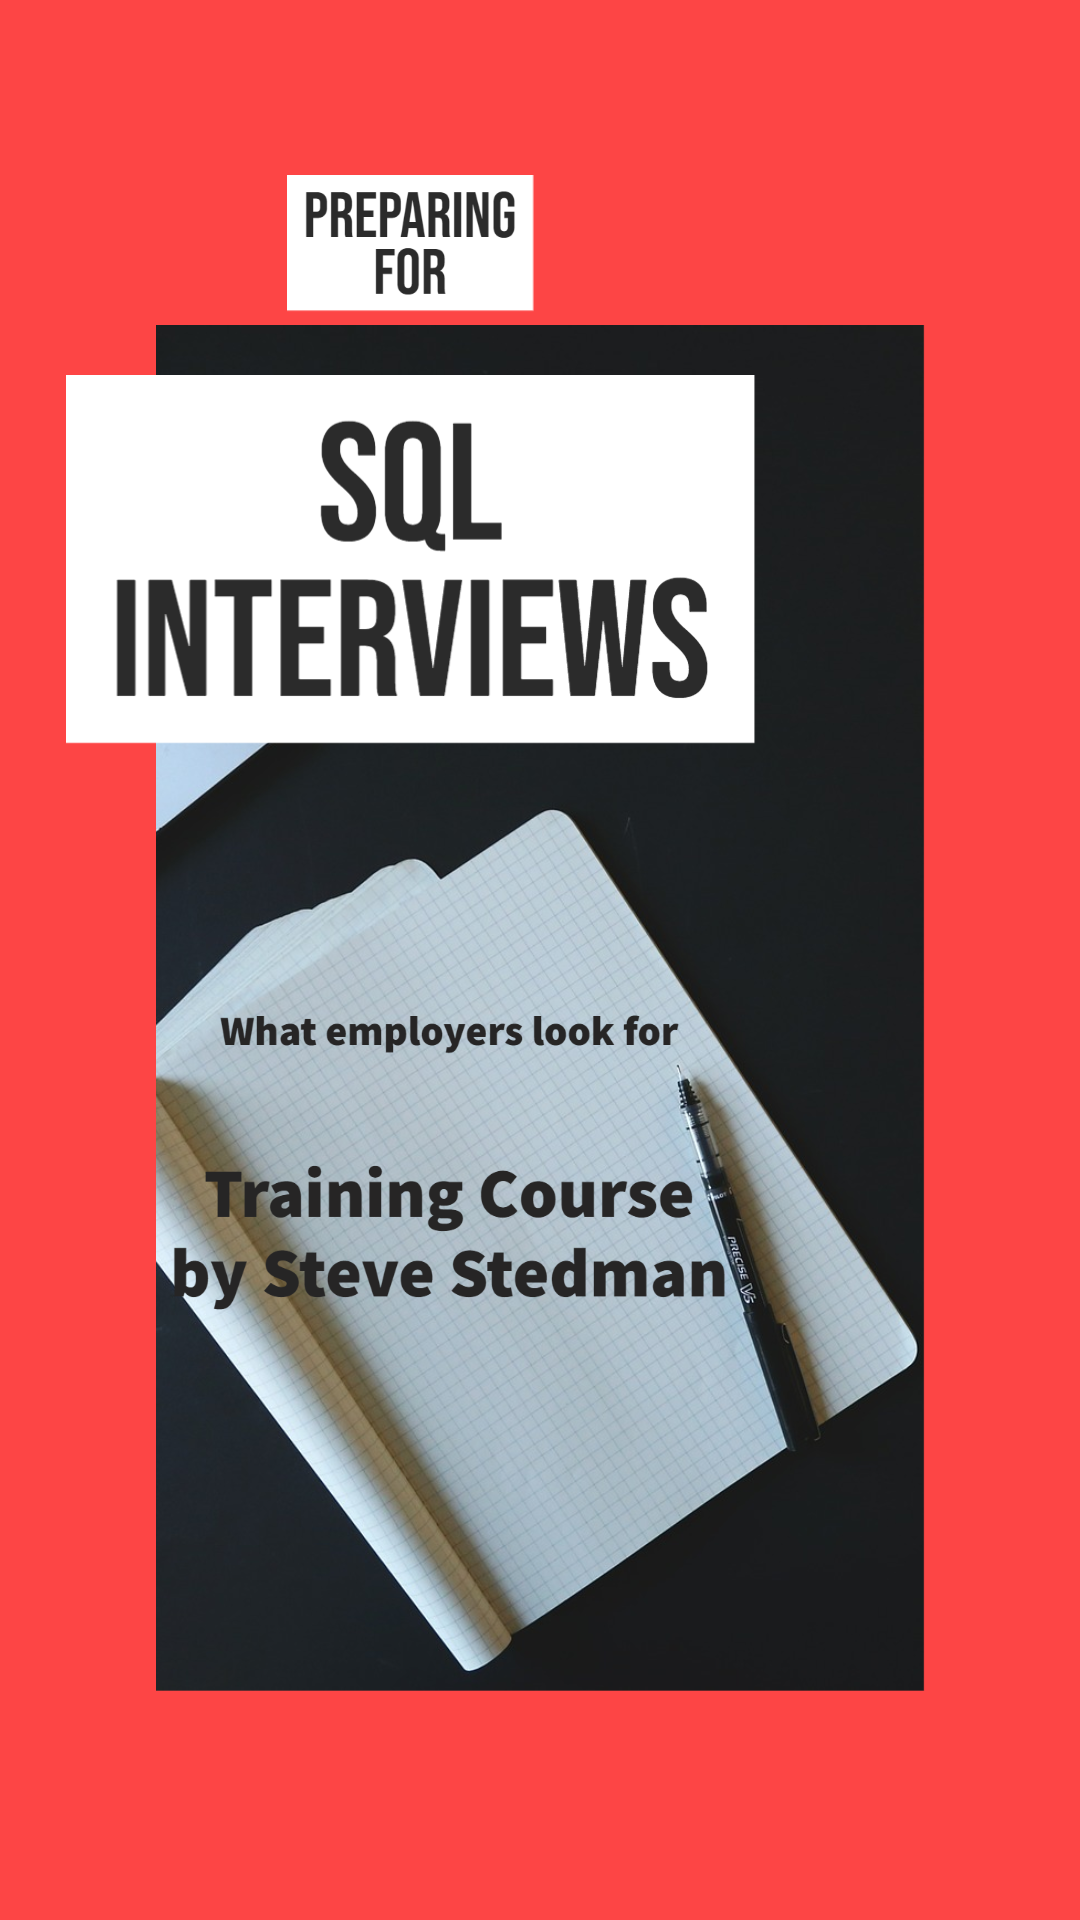 SQL School: Increasing Your Salary by Interviewing